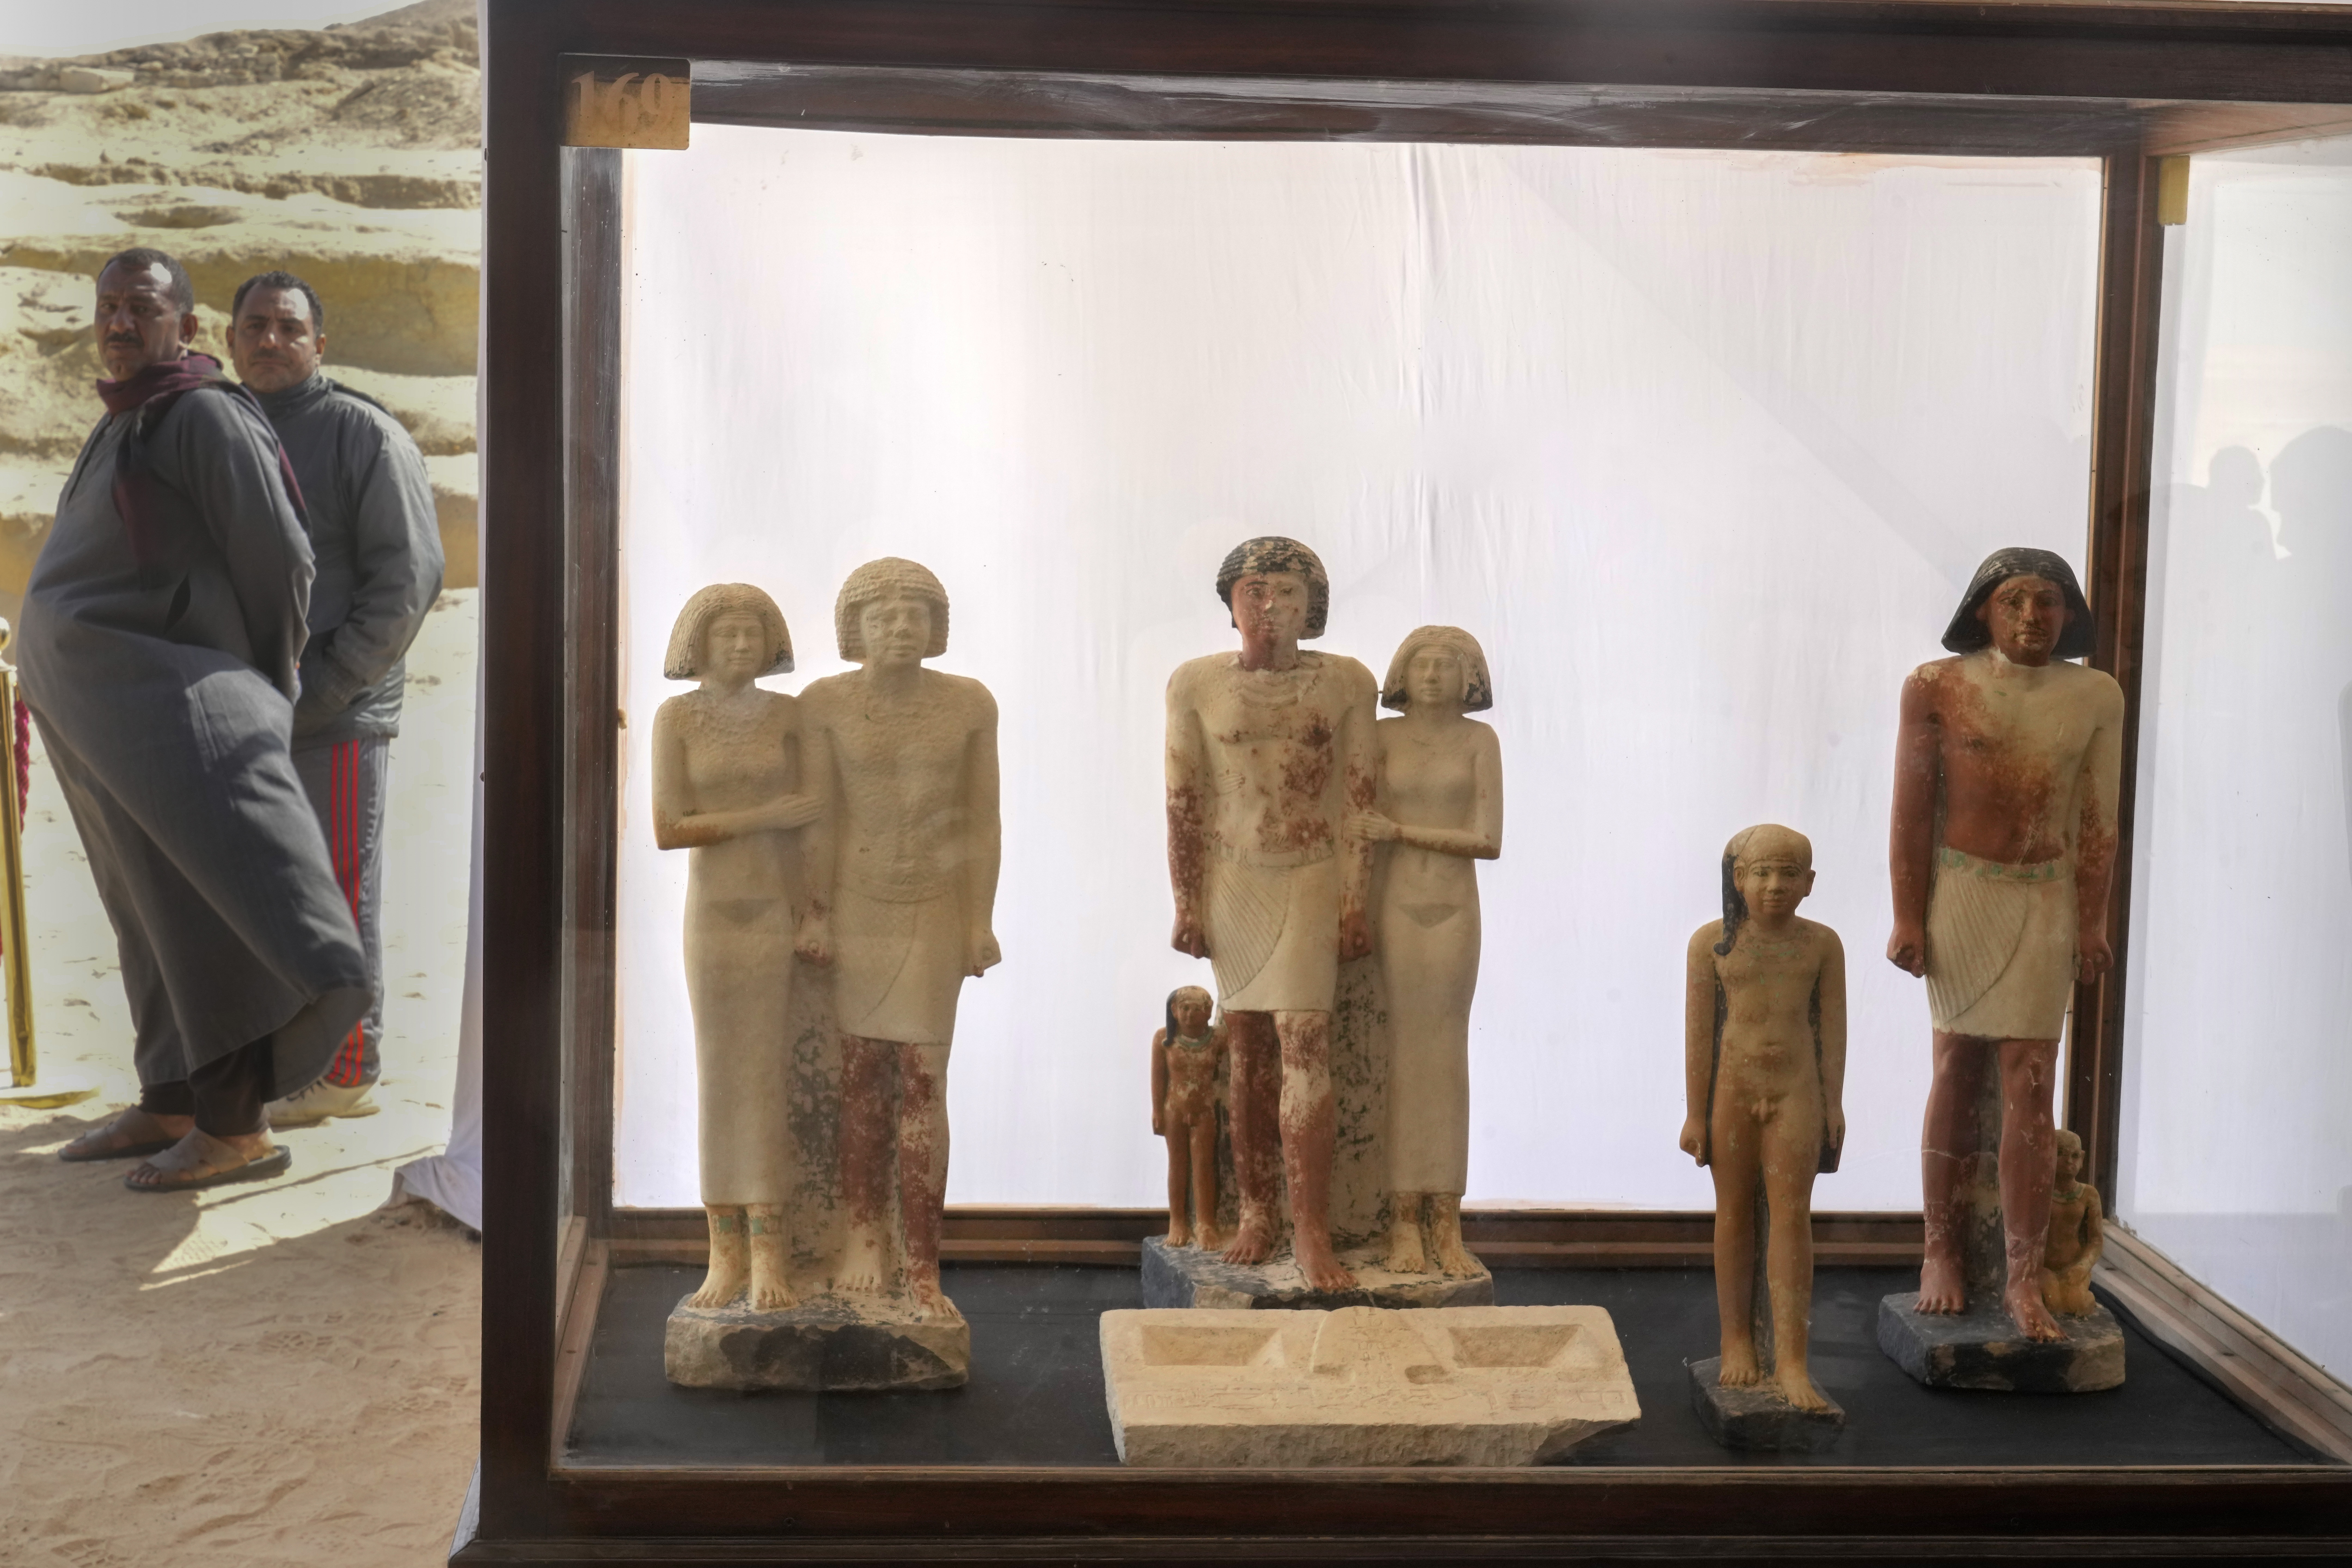 Egyptian antiquities guards stand behind discovered artifacts (AP Photo/Amr Nabil)